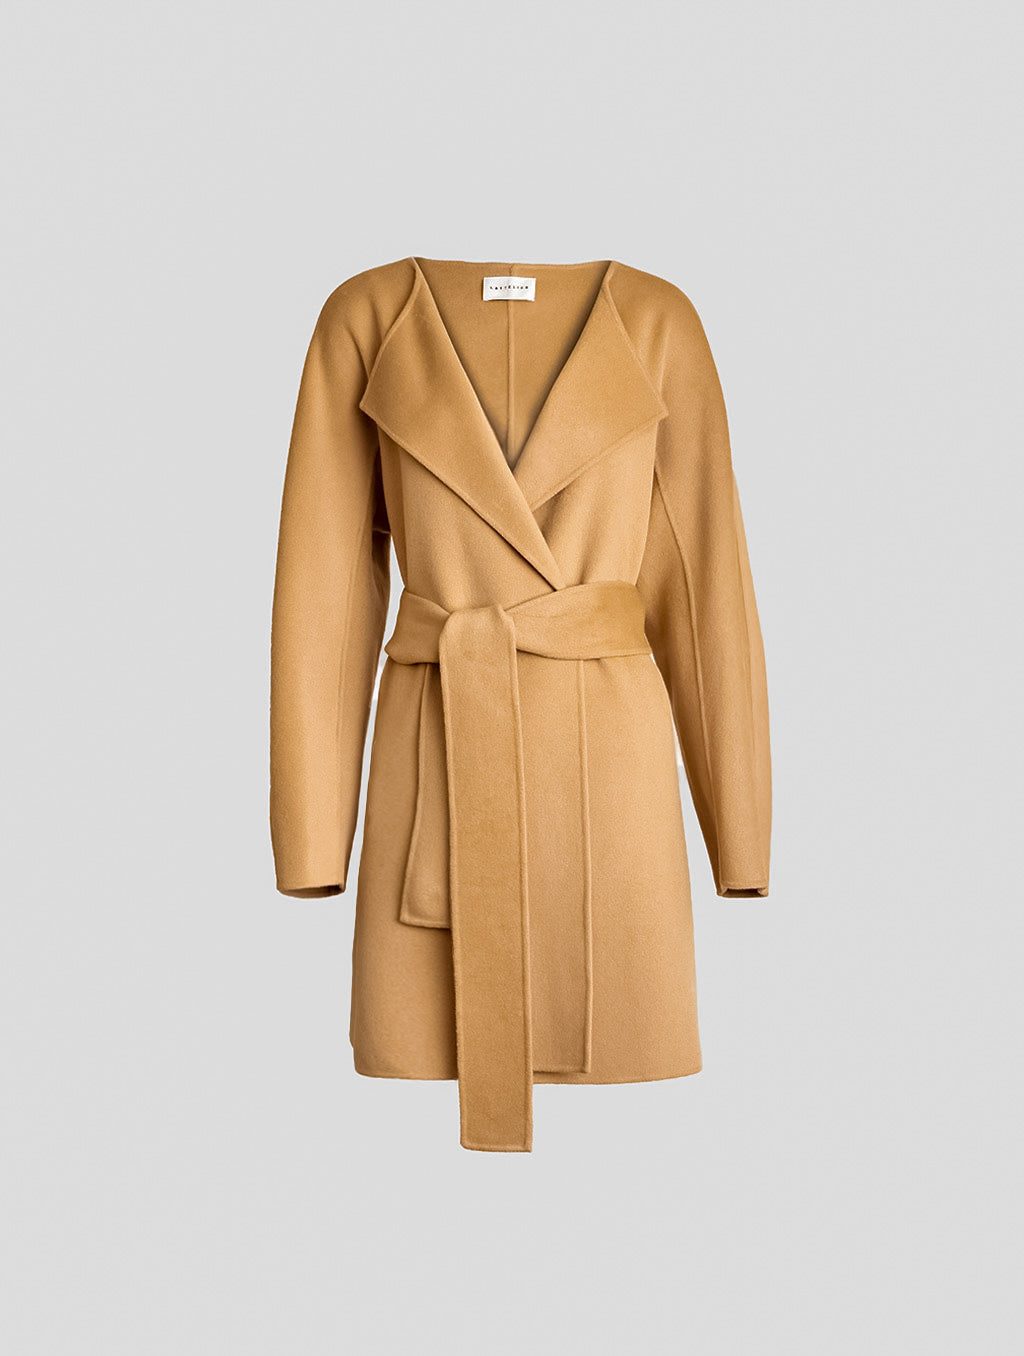 Shawl Collar Belted Cashmere Coat